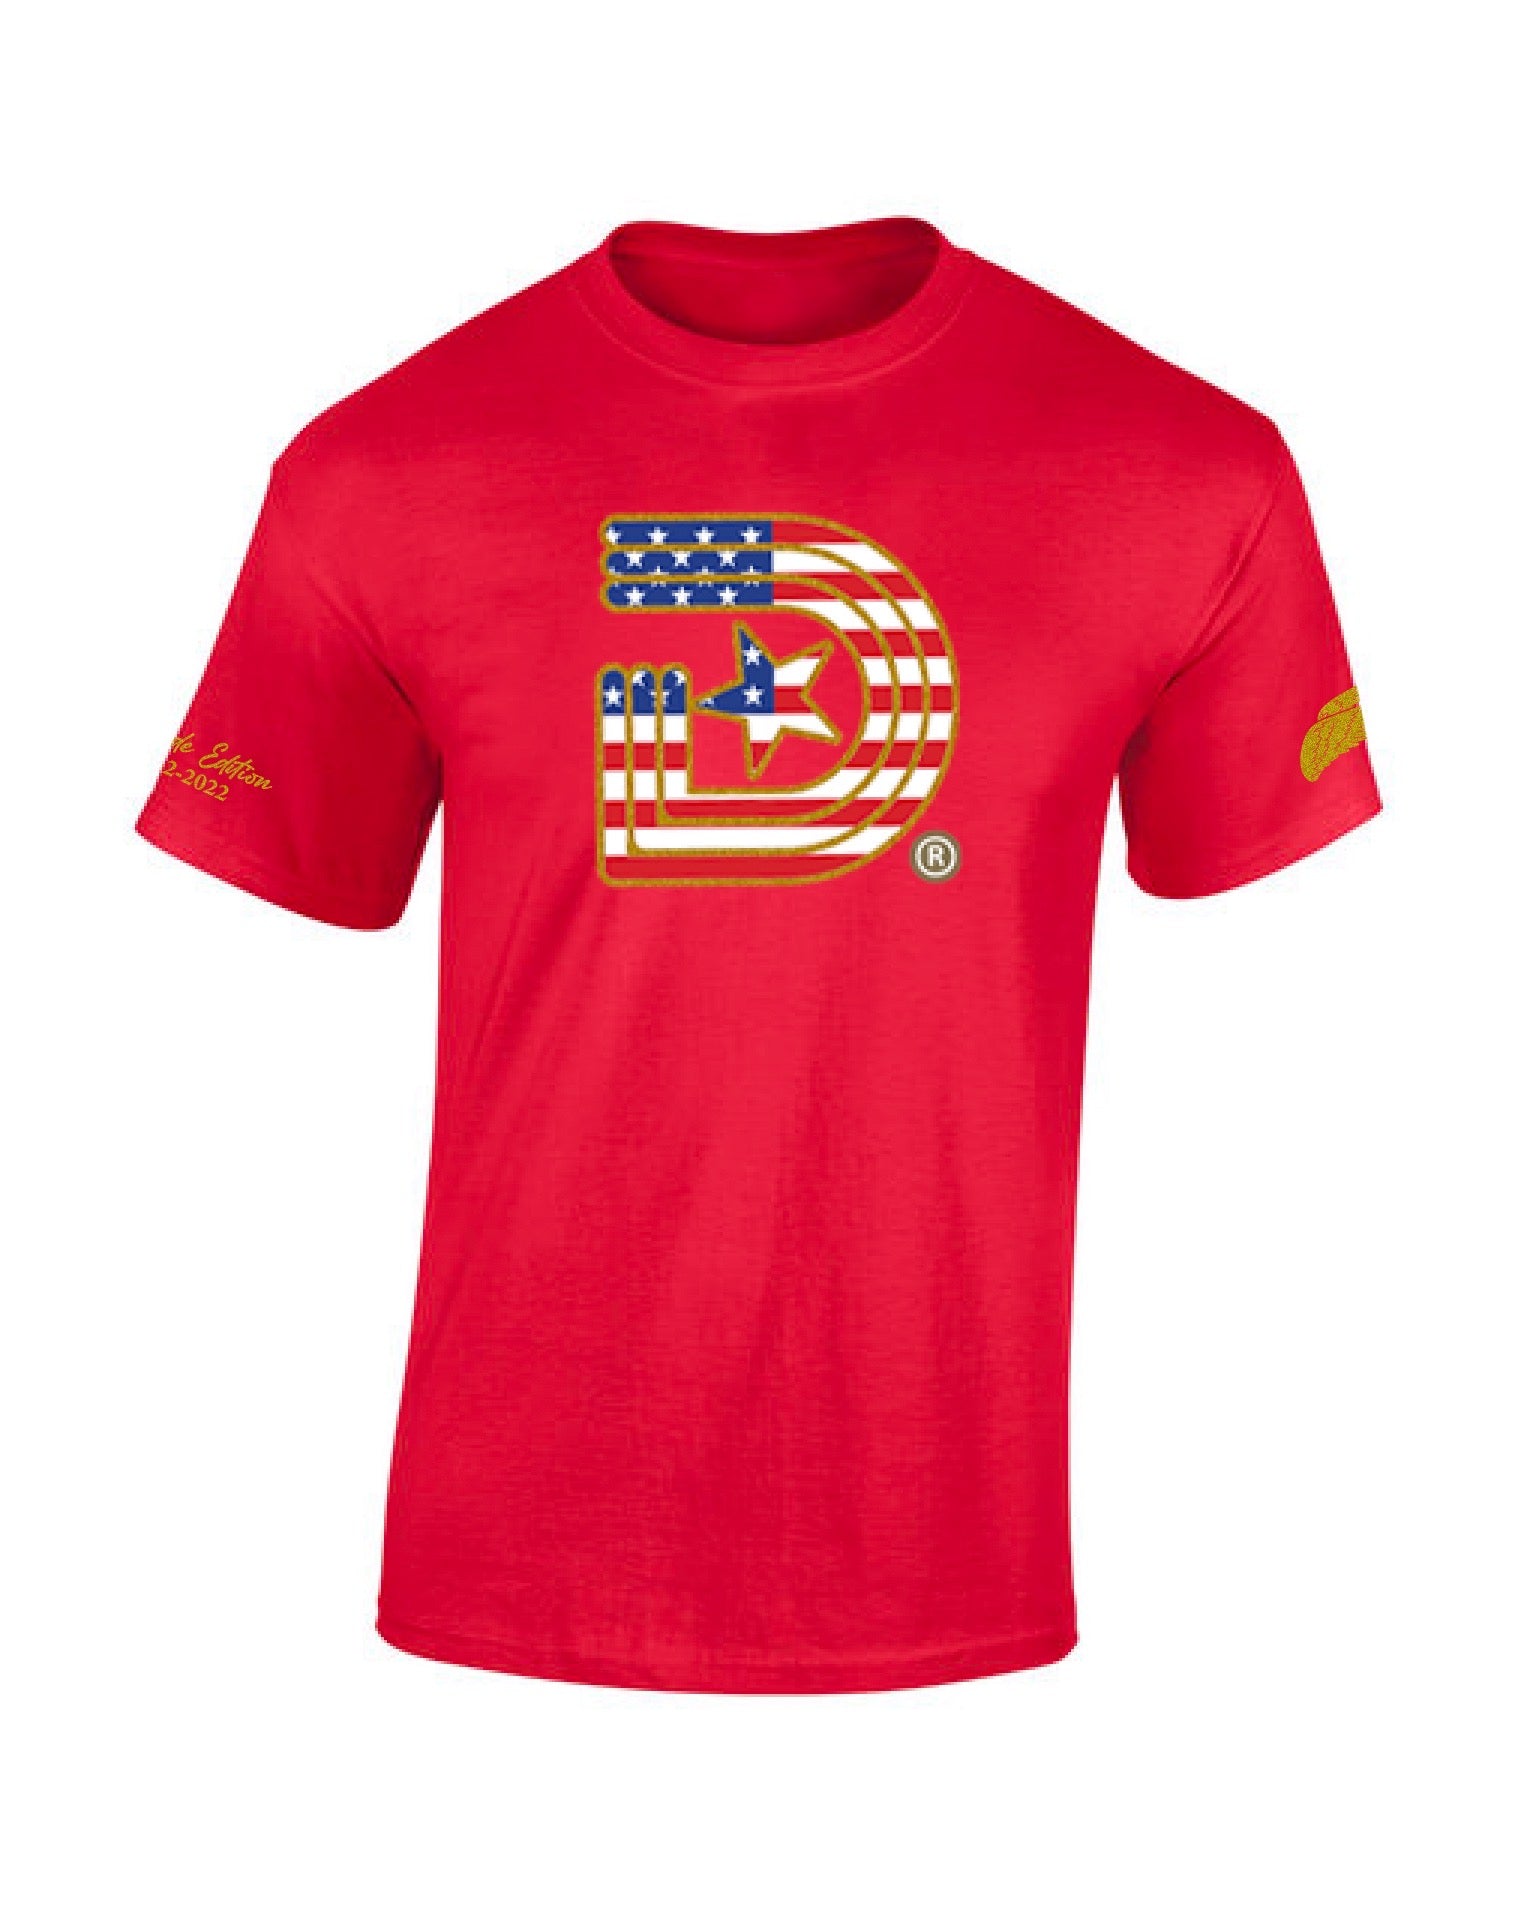 Triple D Red Star Spangled Tee - Decade Edition